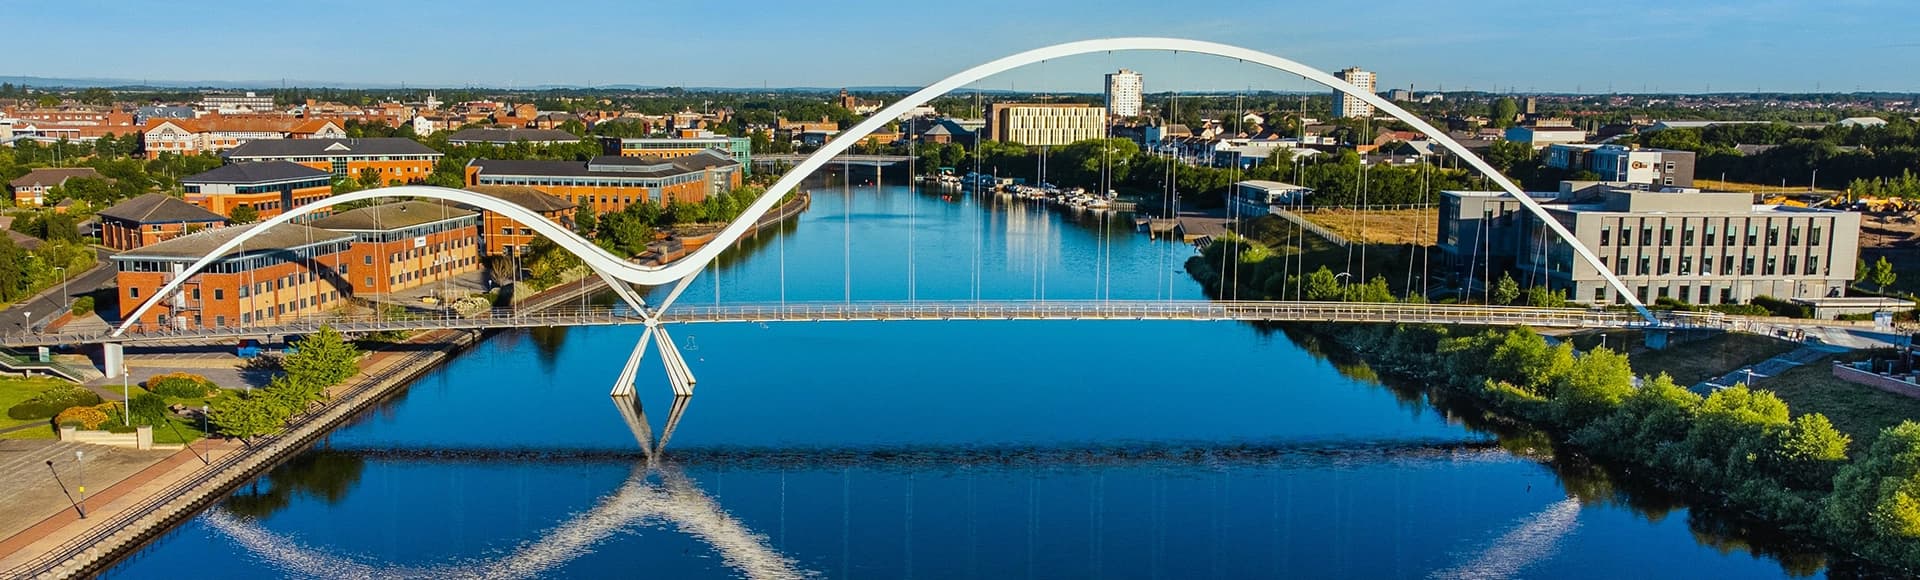 Aerial view of the Infinity Bridge spanning the river Tees in Stockton, California